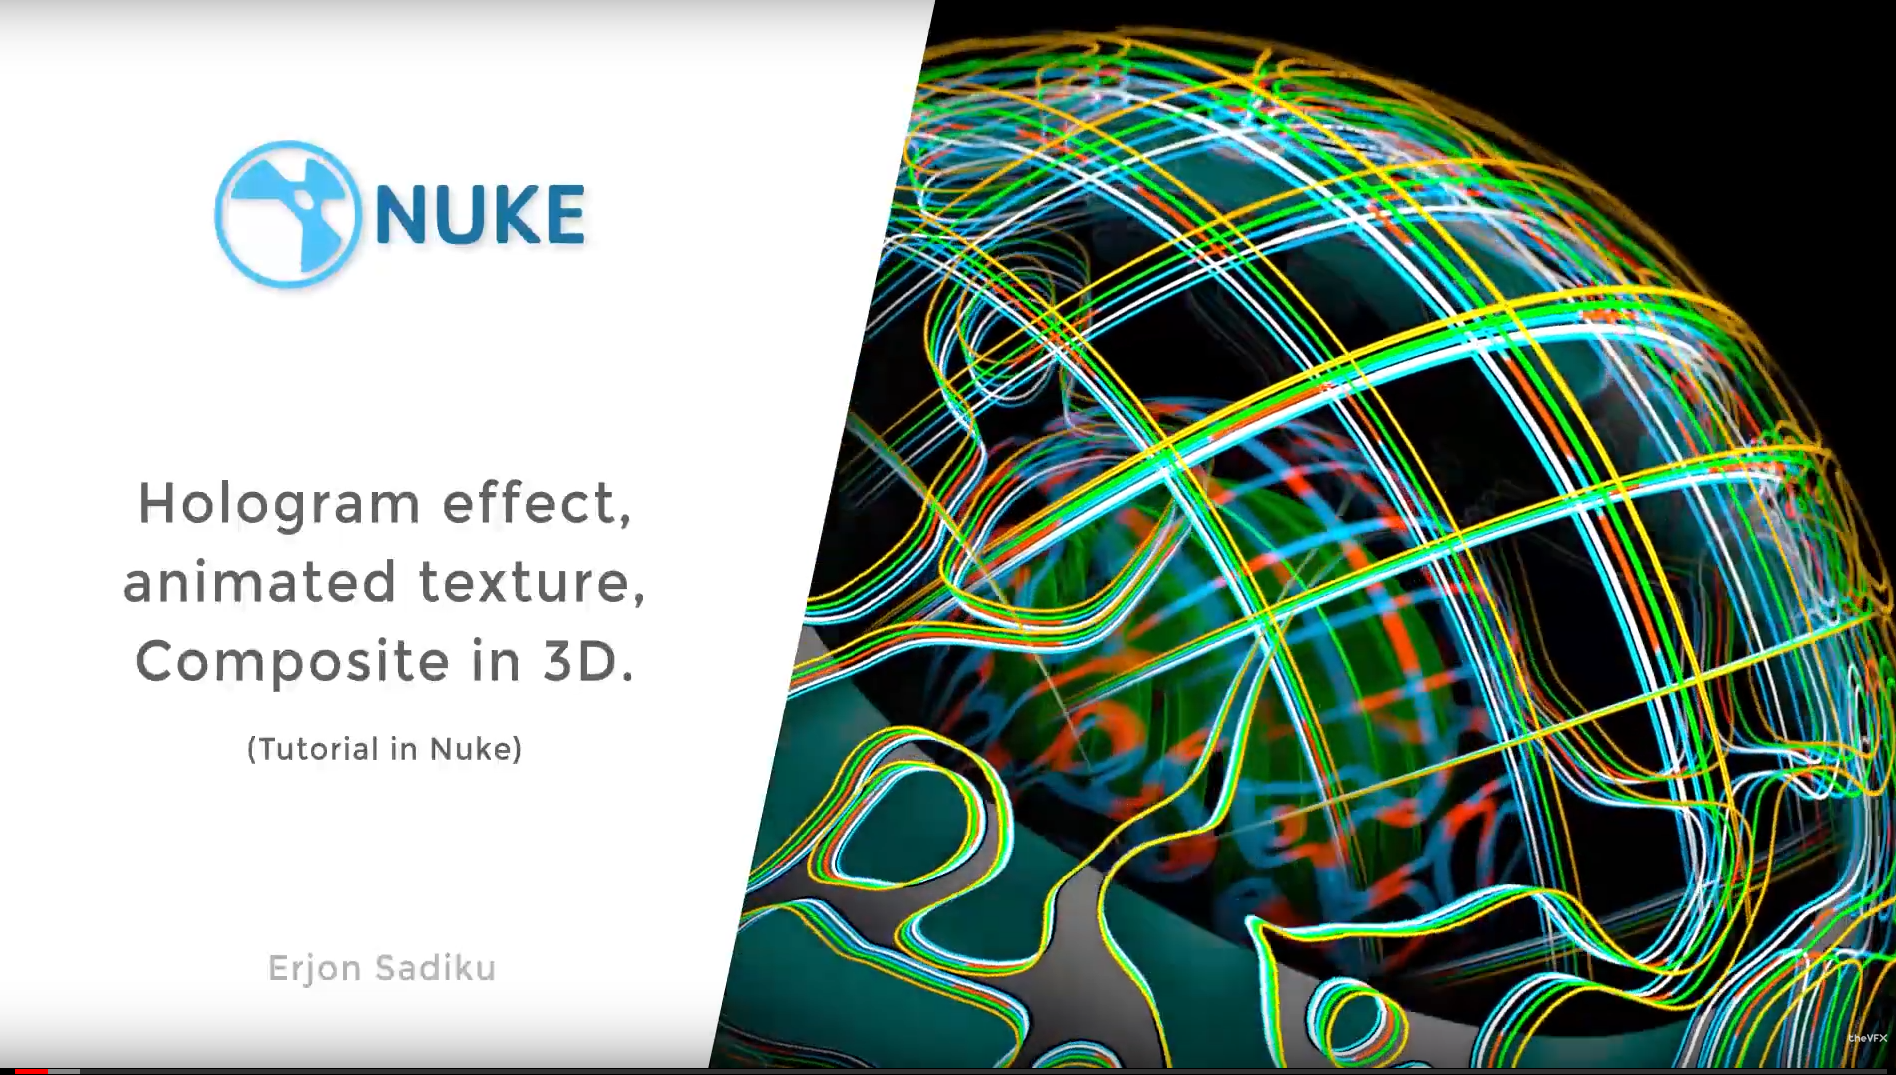 Hologram effect, animated texture, Composite in 3D. (Tutorial in Nuke)